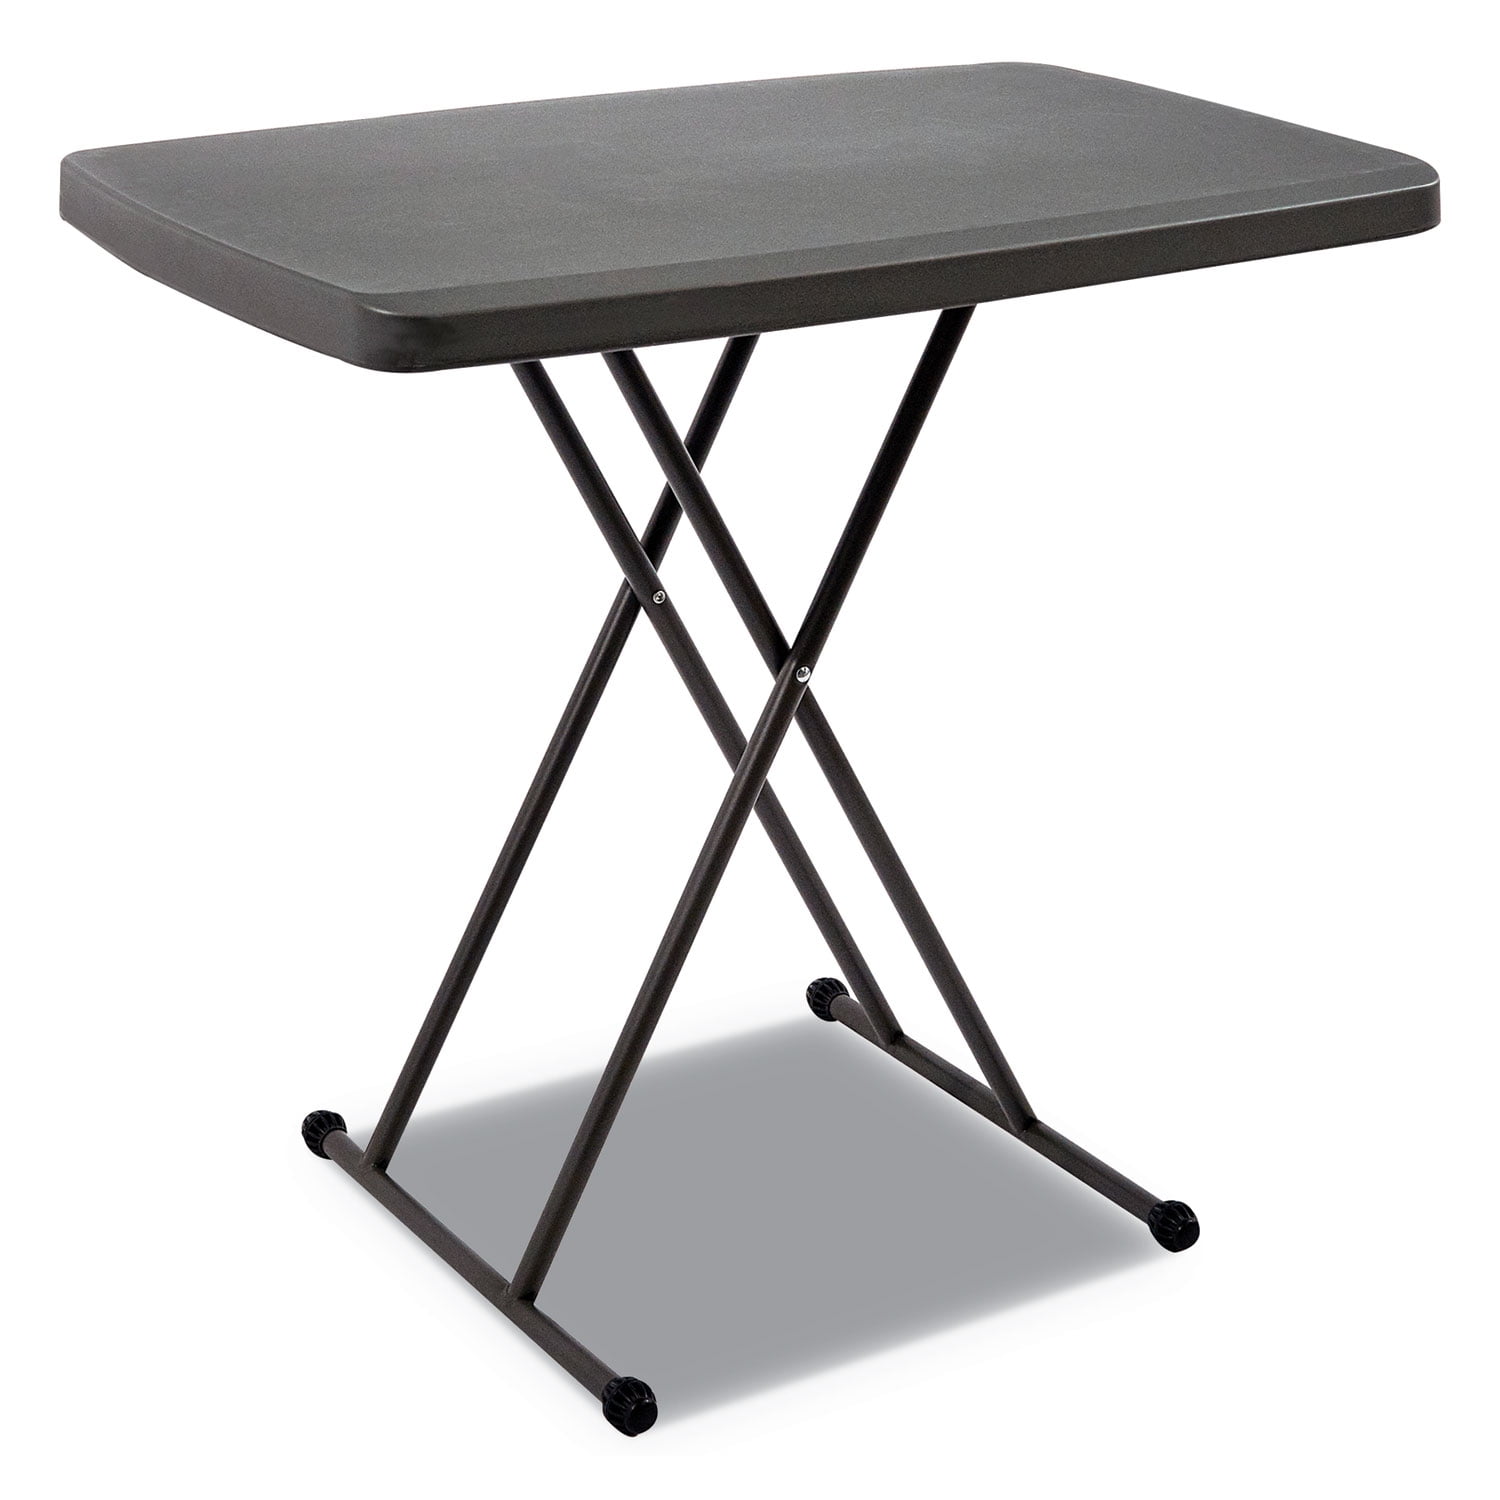 Iceberg IndestrucTables Too 1200 Series Resin Personal Folding Table 30 x 20 